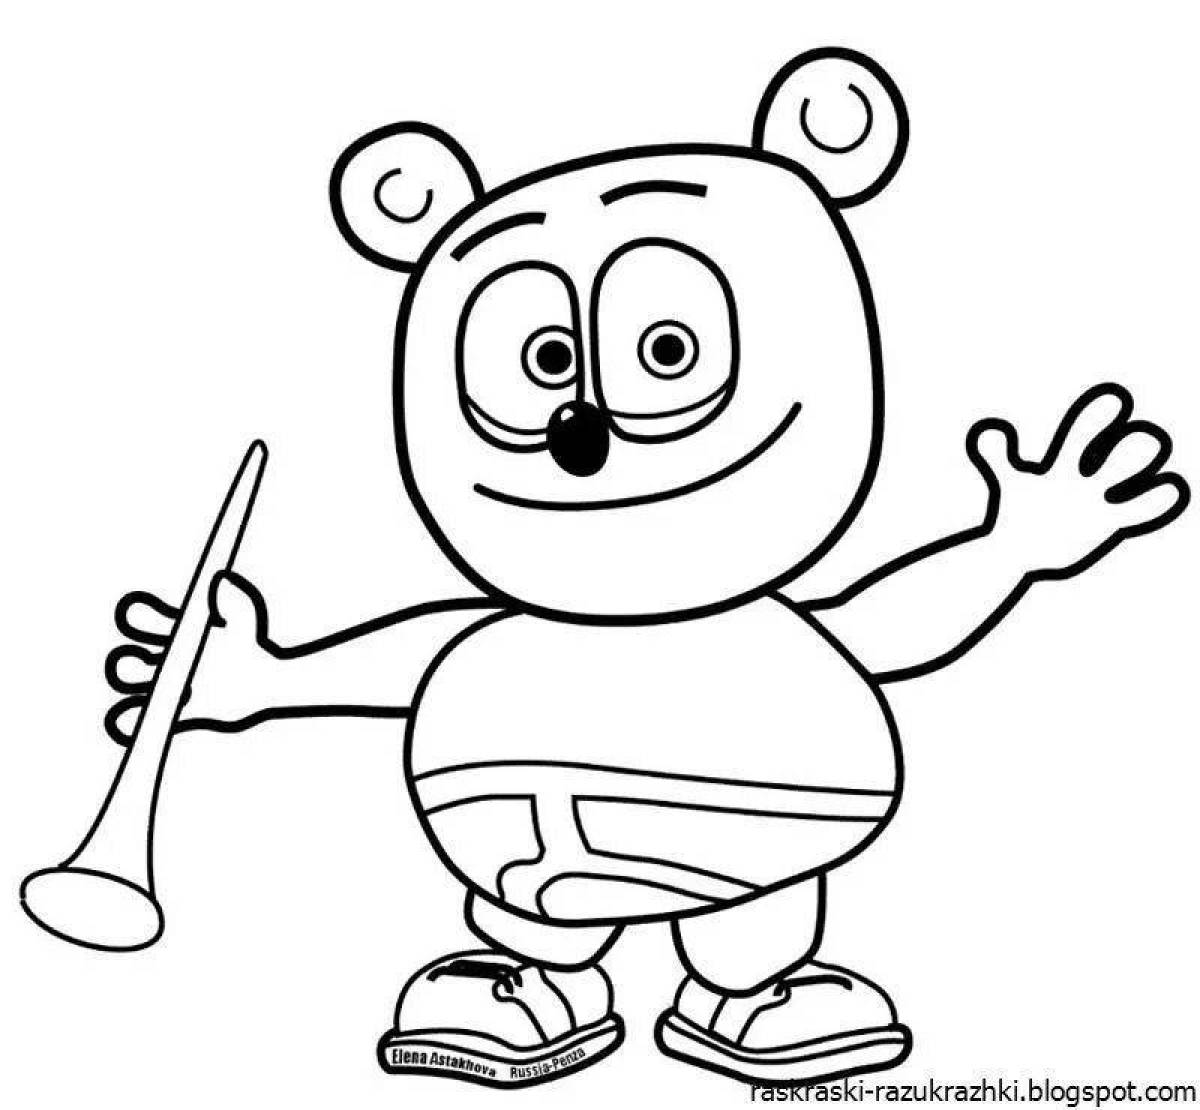 Adorable Humber coloring page